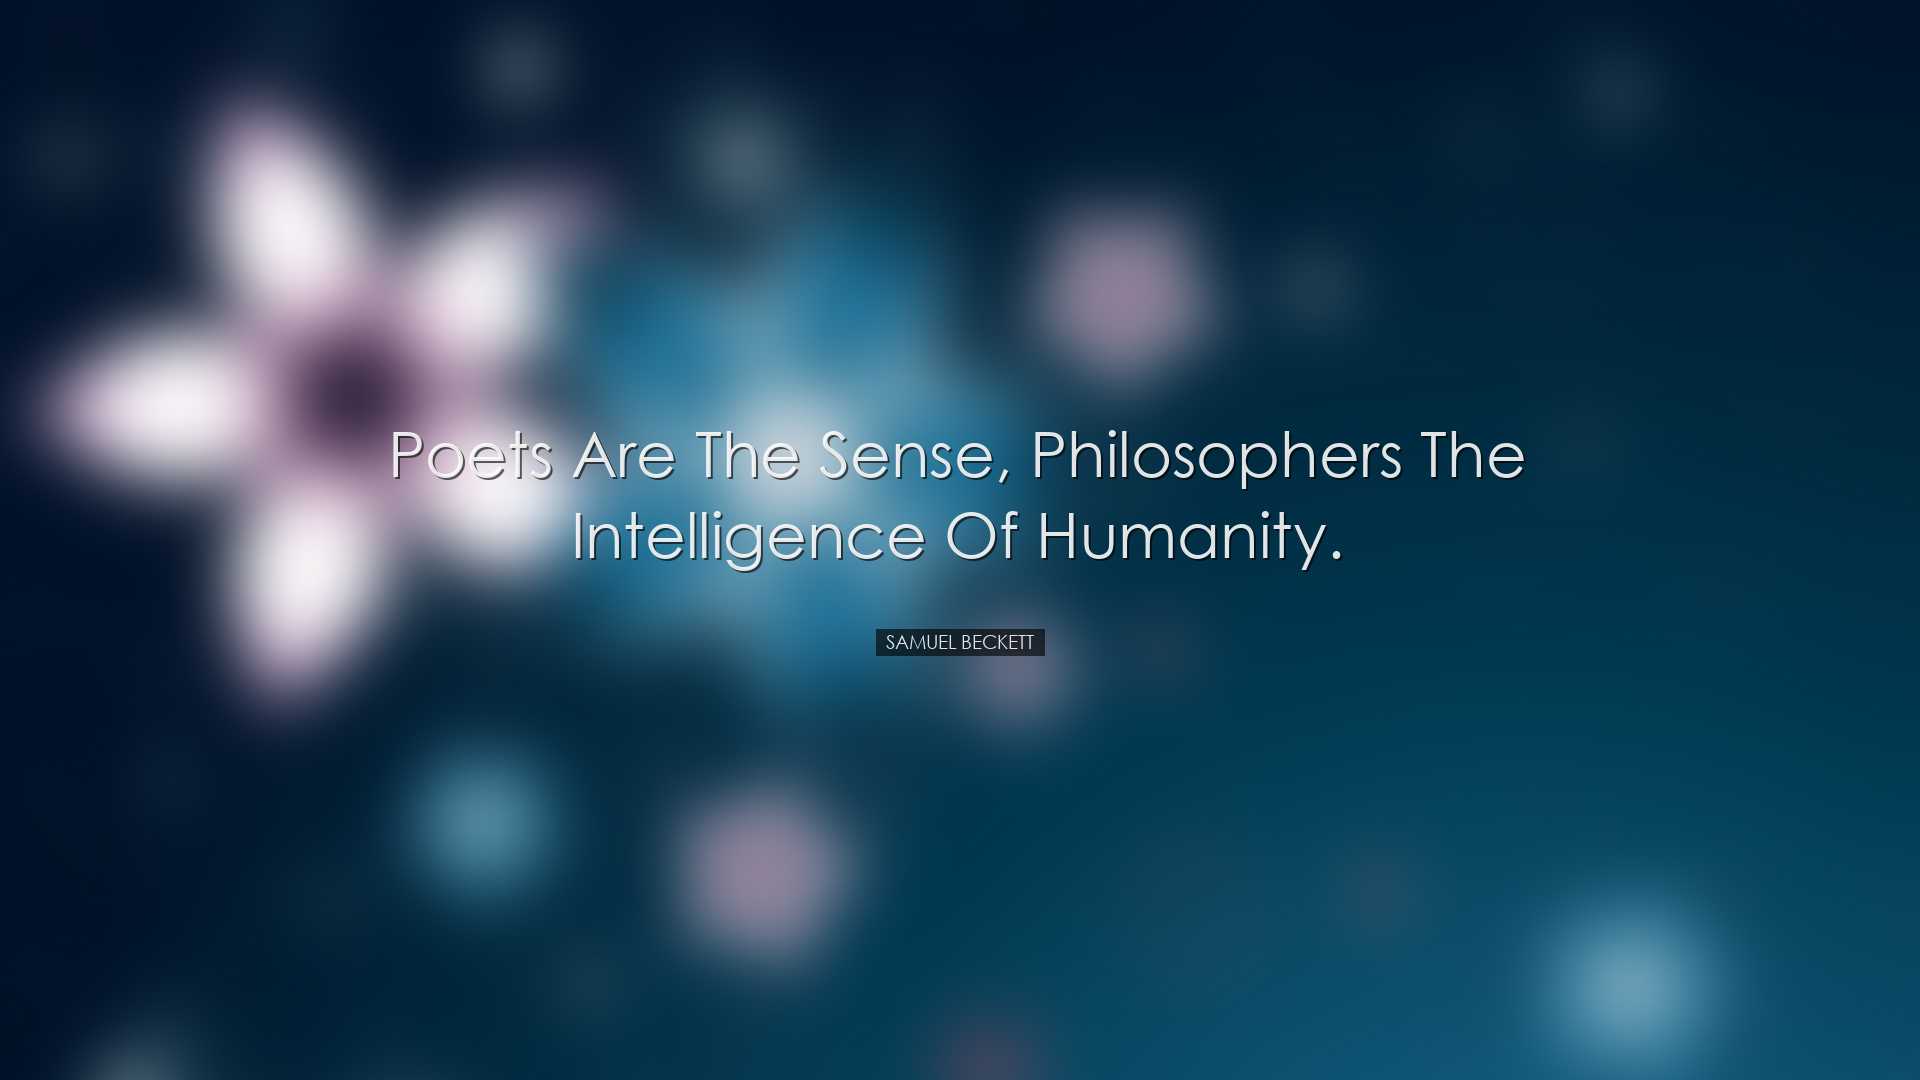 Poets are the sense, philosophers the intelligence of humanity. -